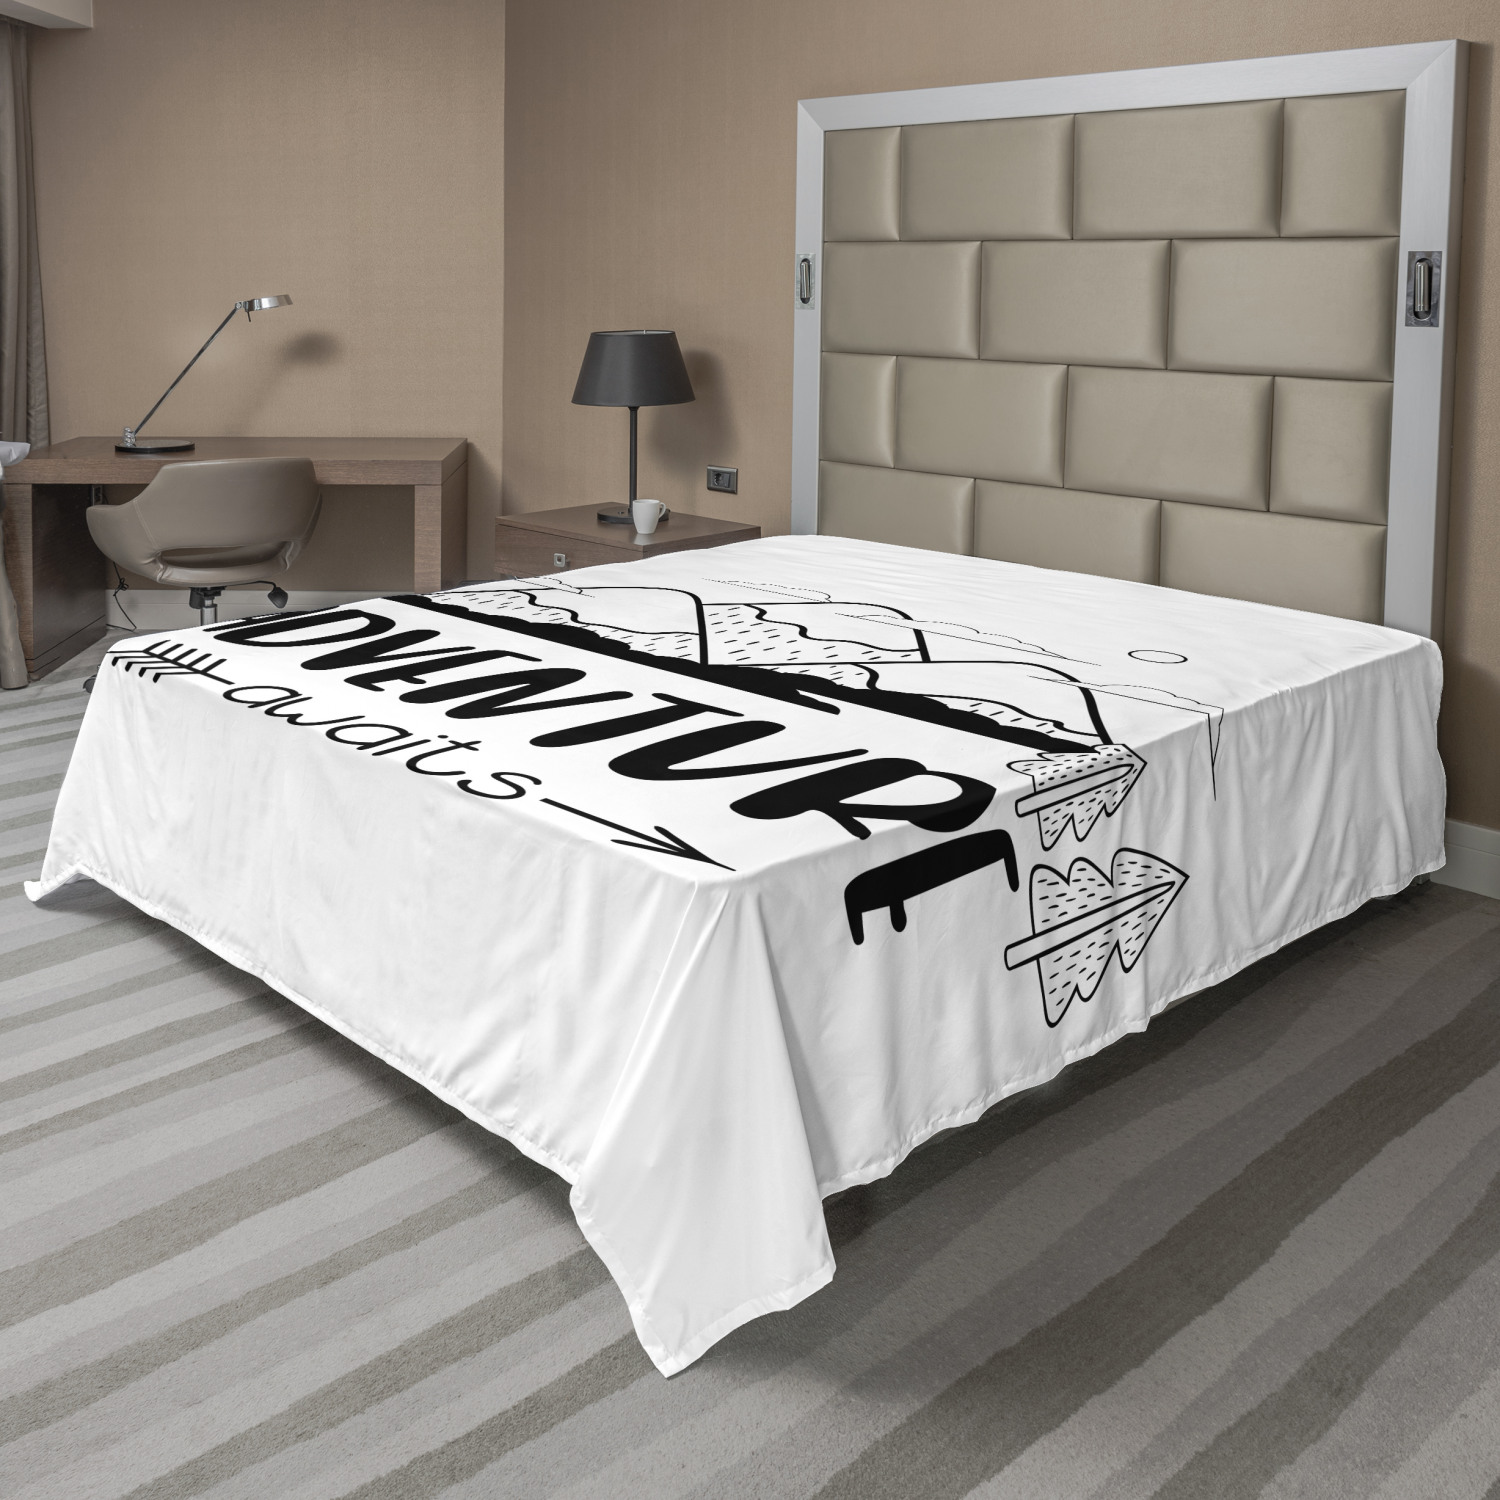 Details about   Ambesonne Typography Flat Sheet Top Sheet Decorative Bedding 6 Sizes 